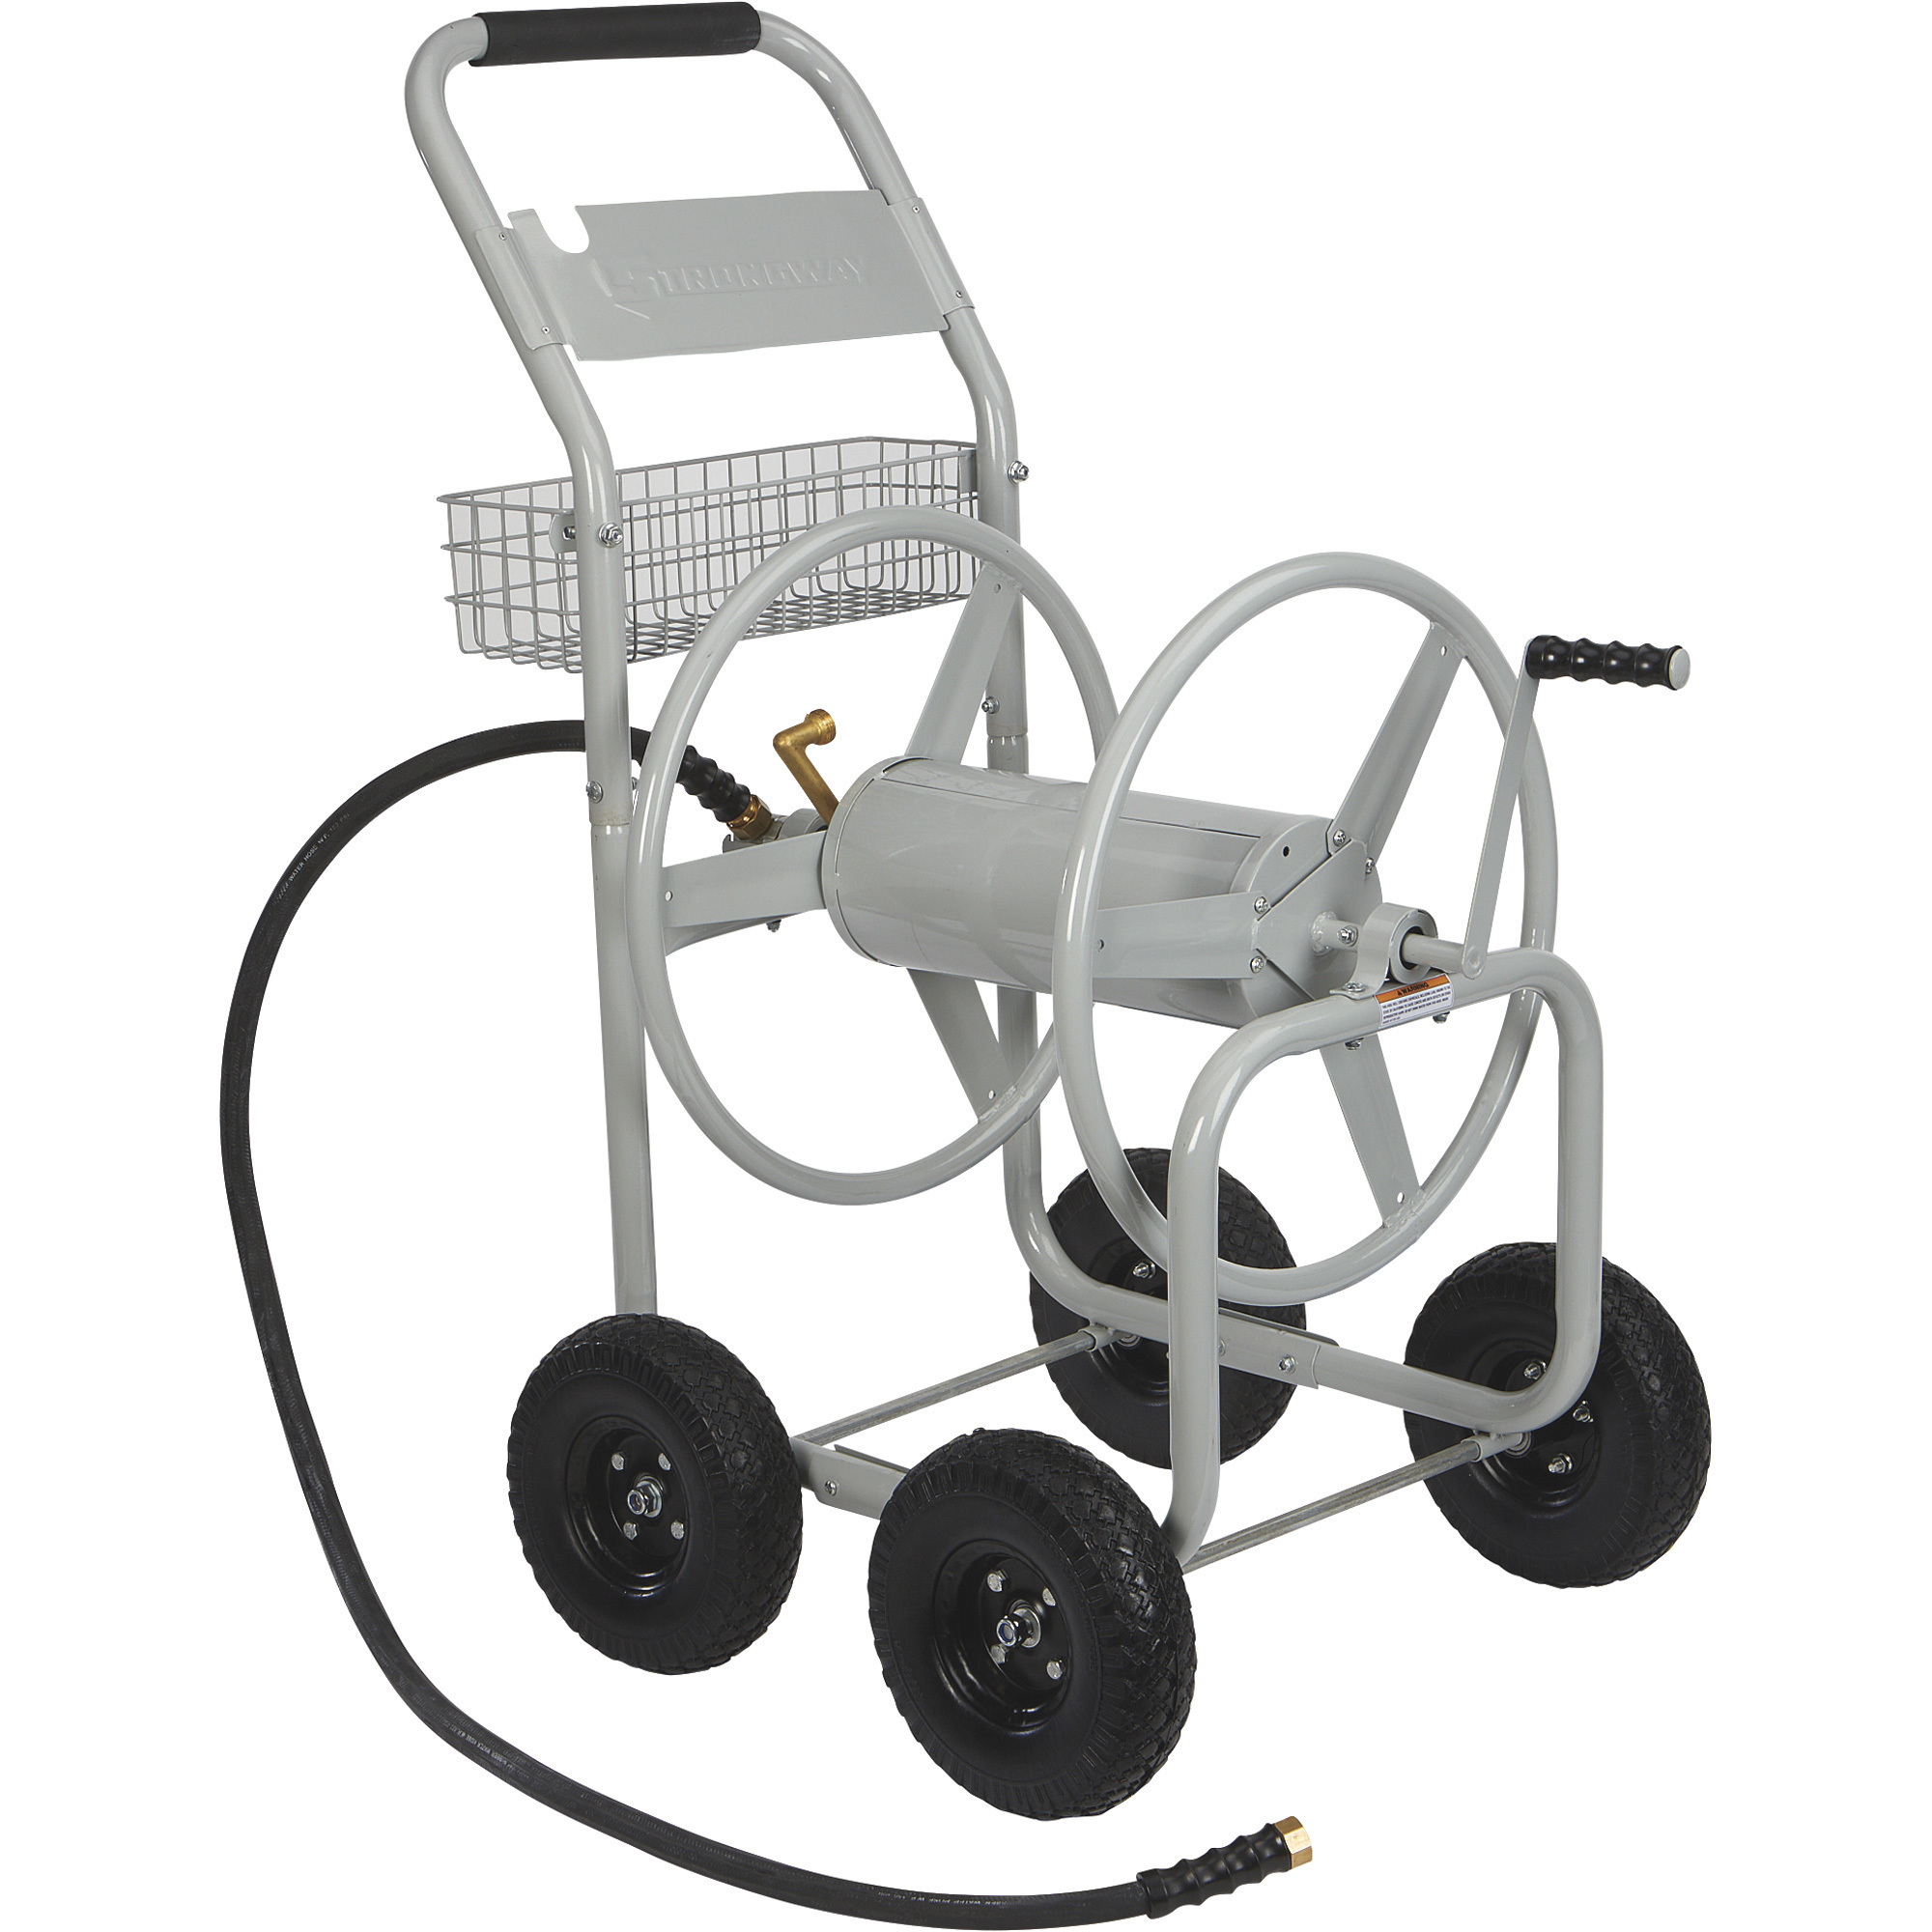 Strongway Garden Hose Reel Cart Replacement Parts - Heavy-duty